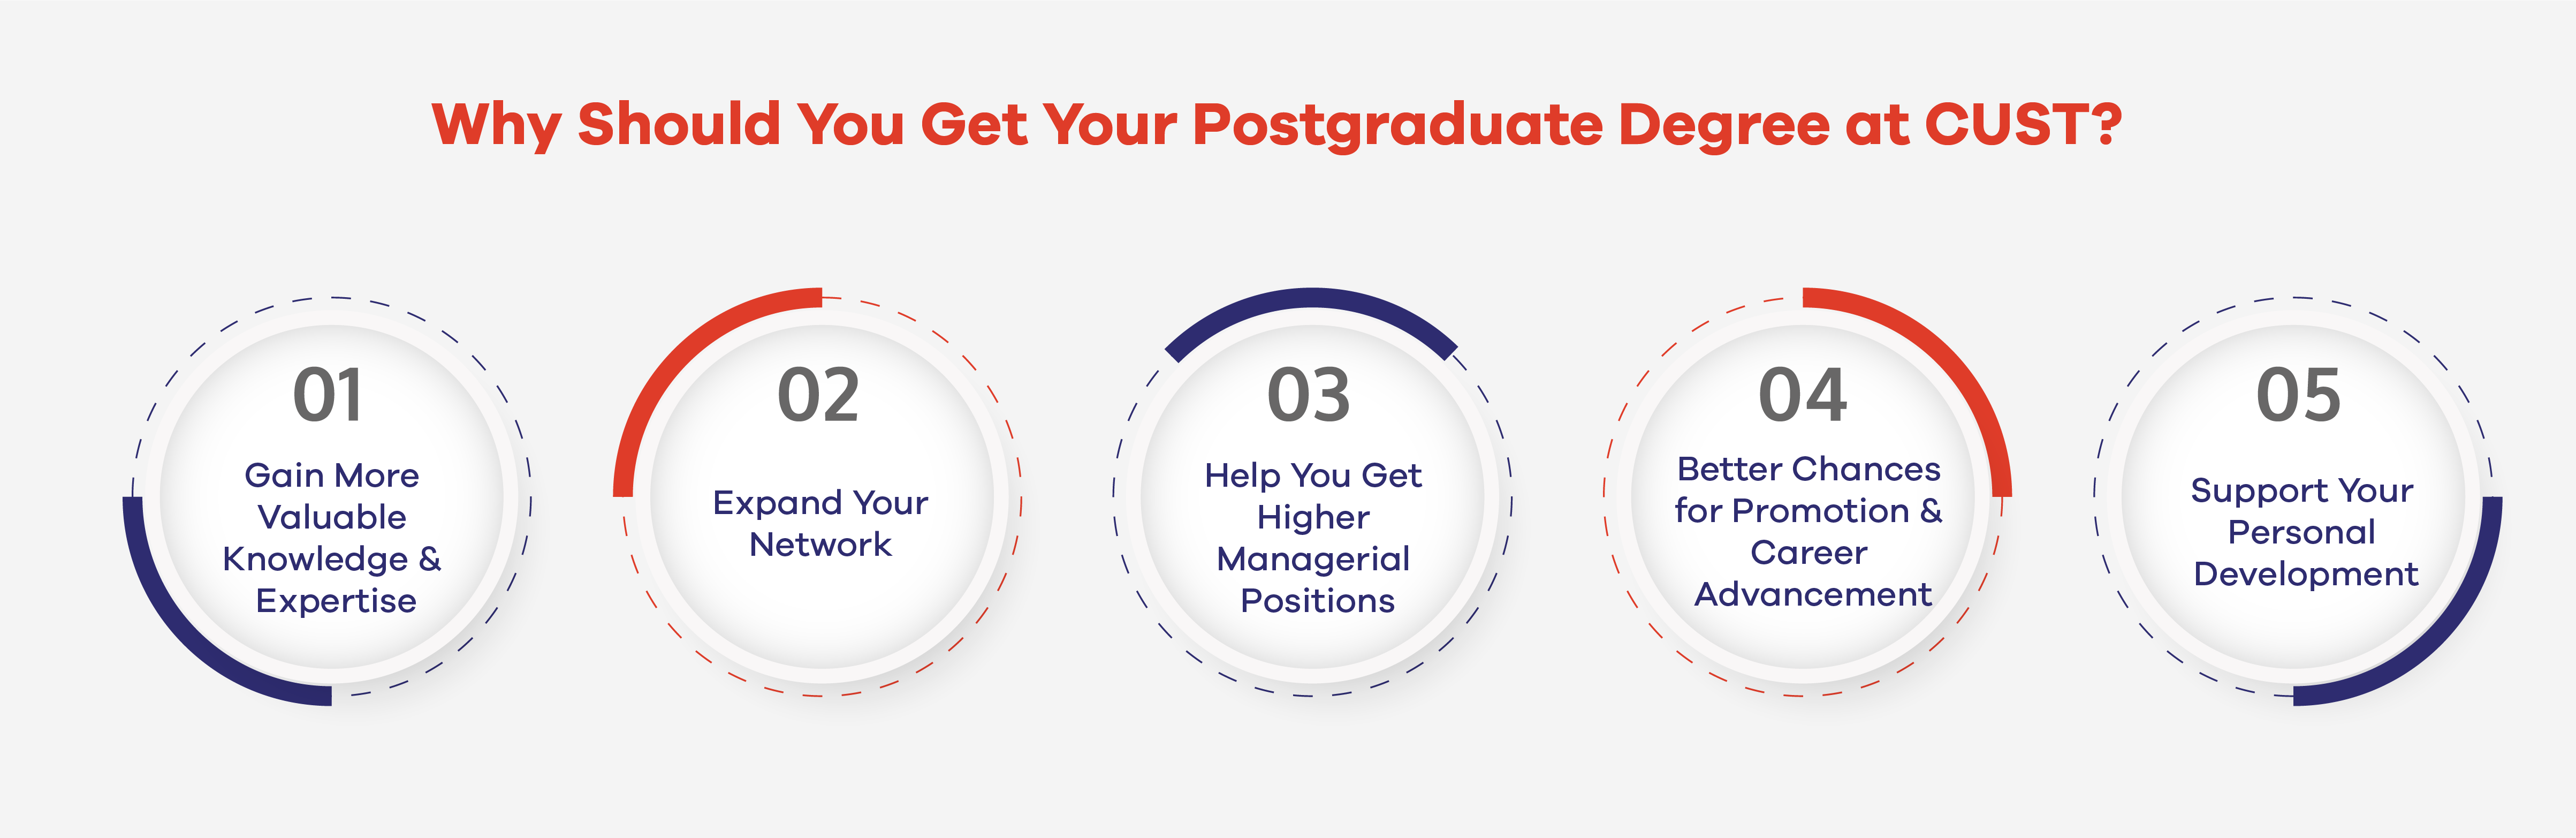 Why Should You Get Postgraduate Degree at CUST?